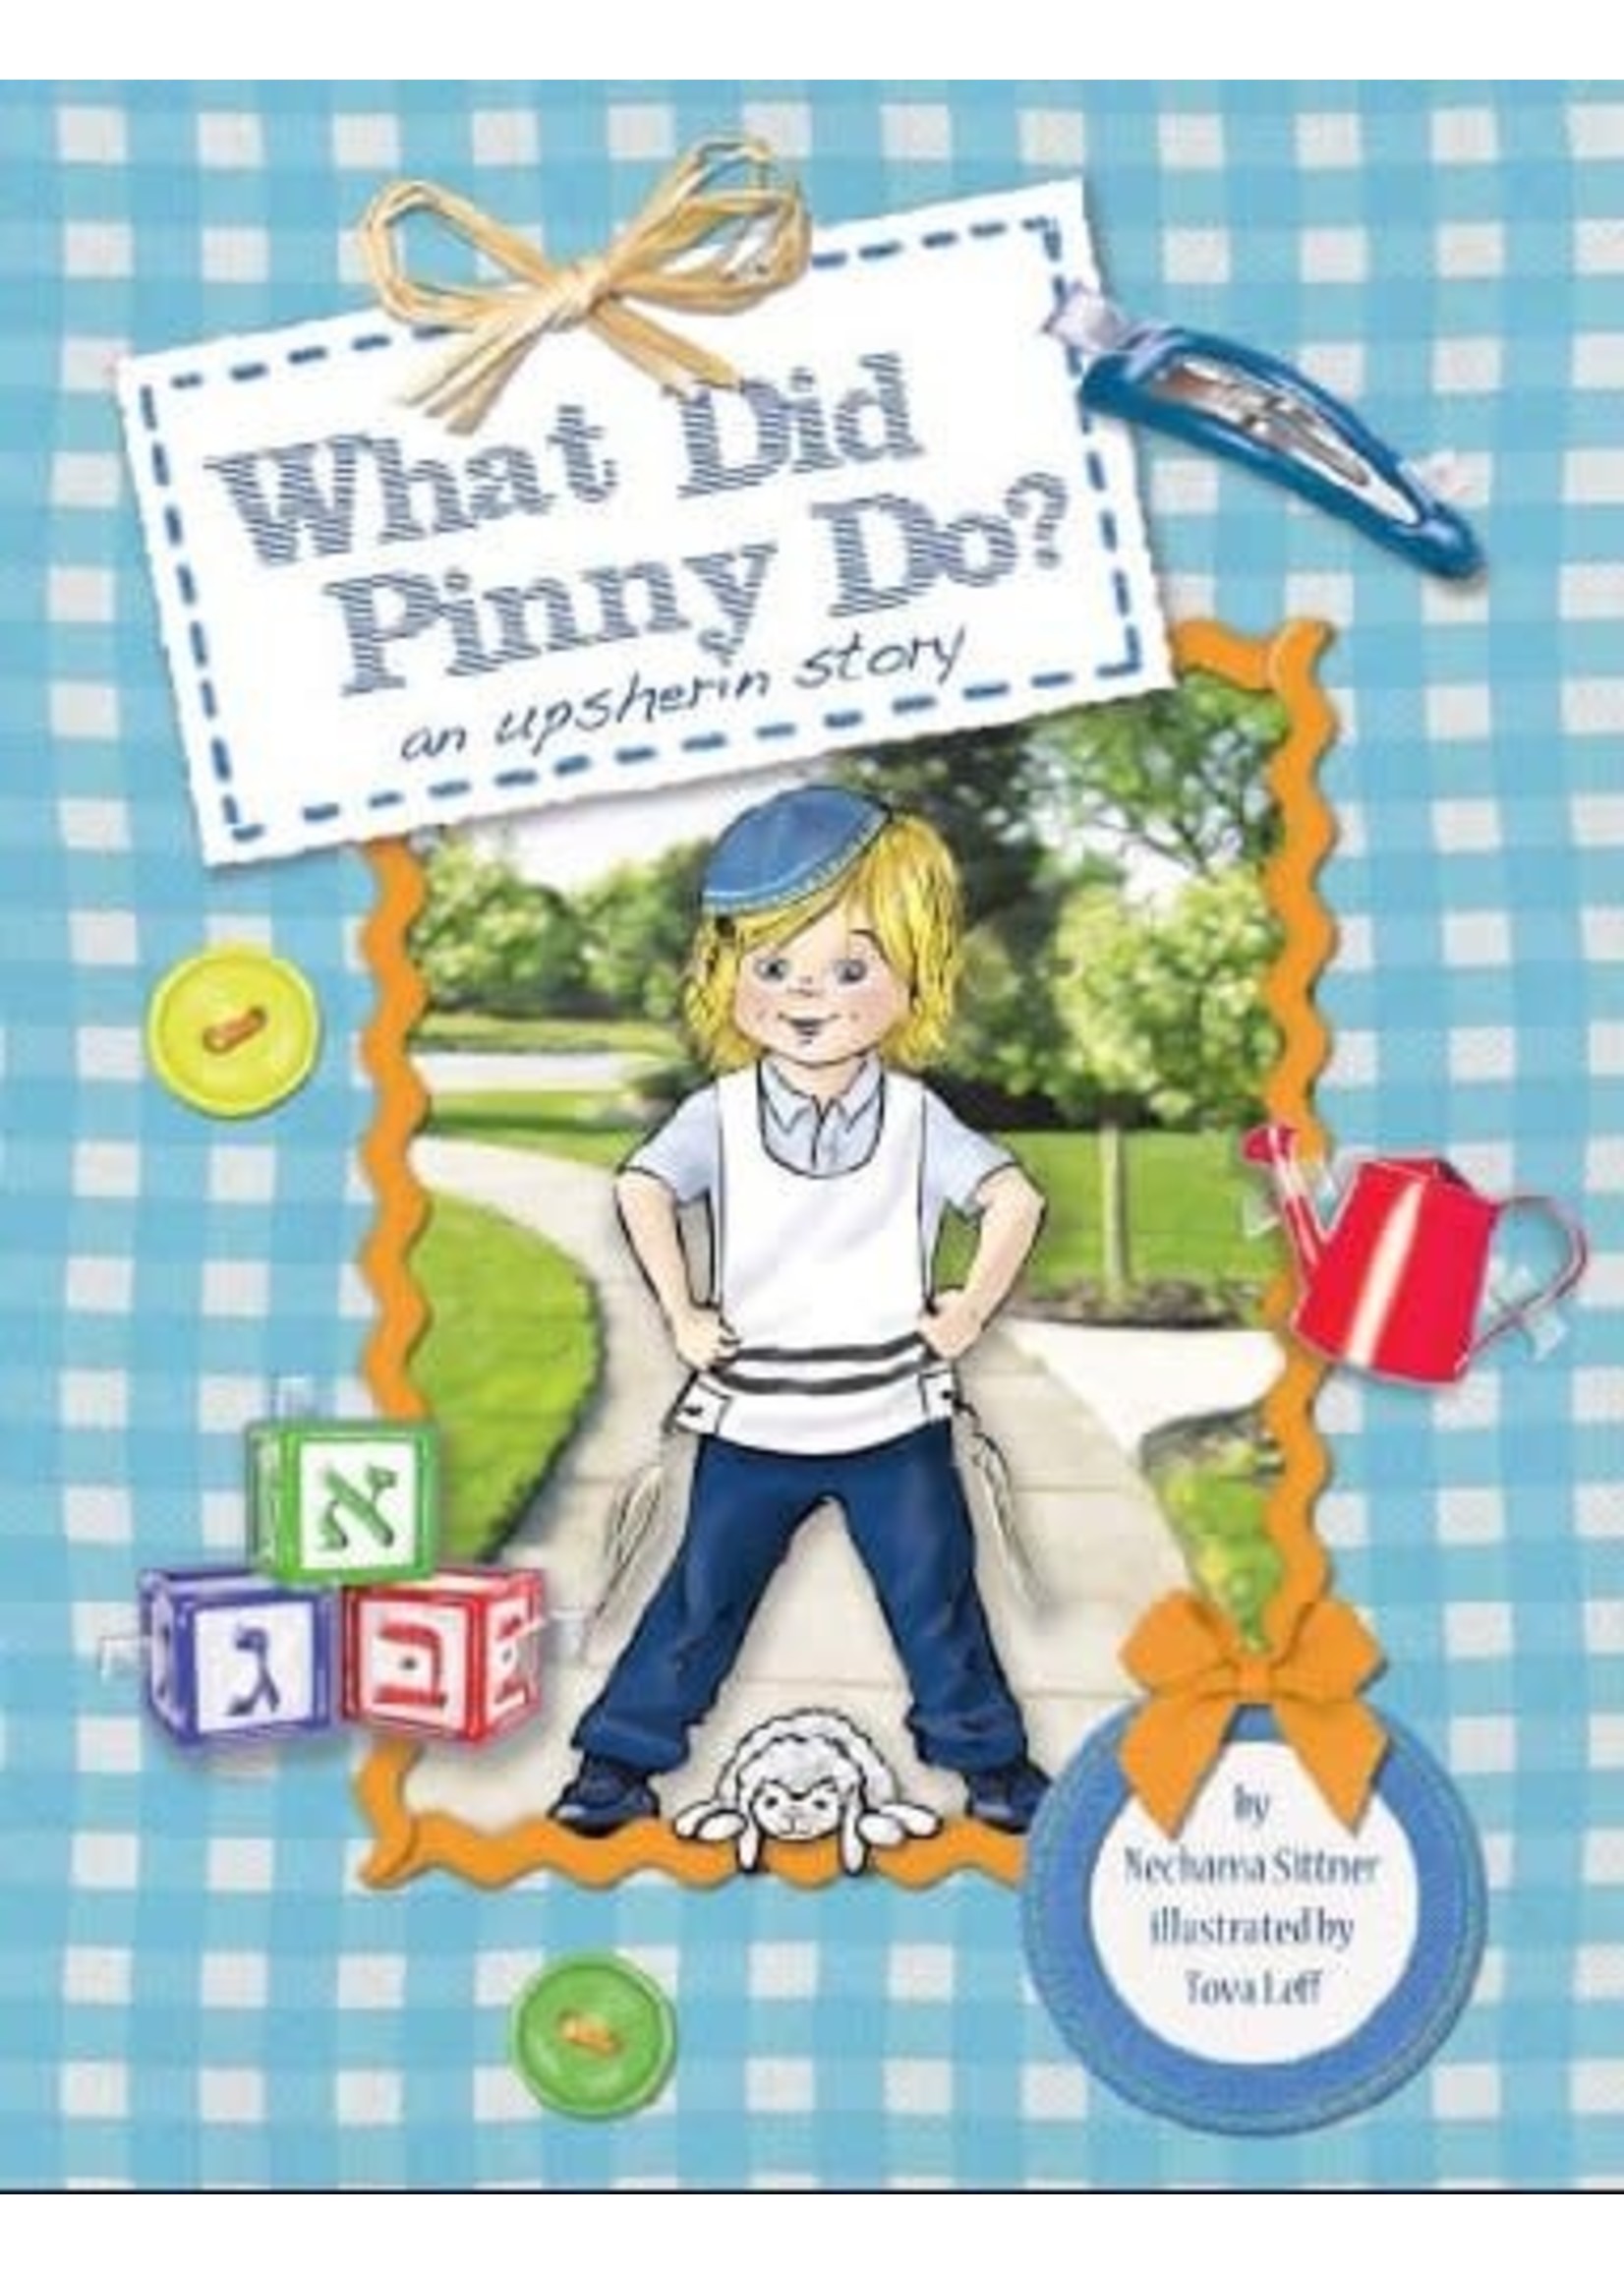 WHAT DID PINNY DO?